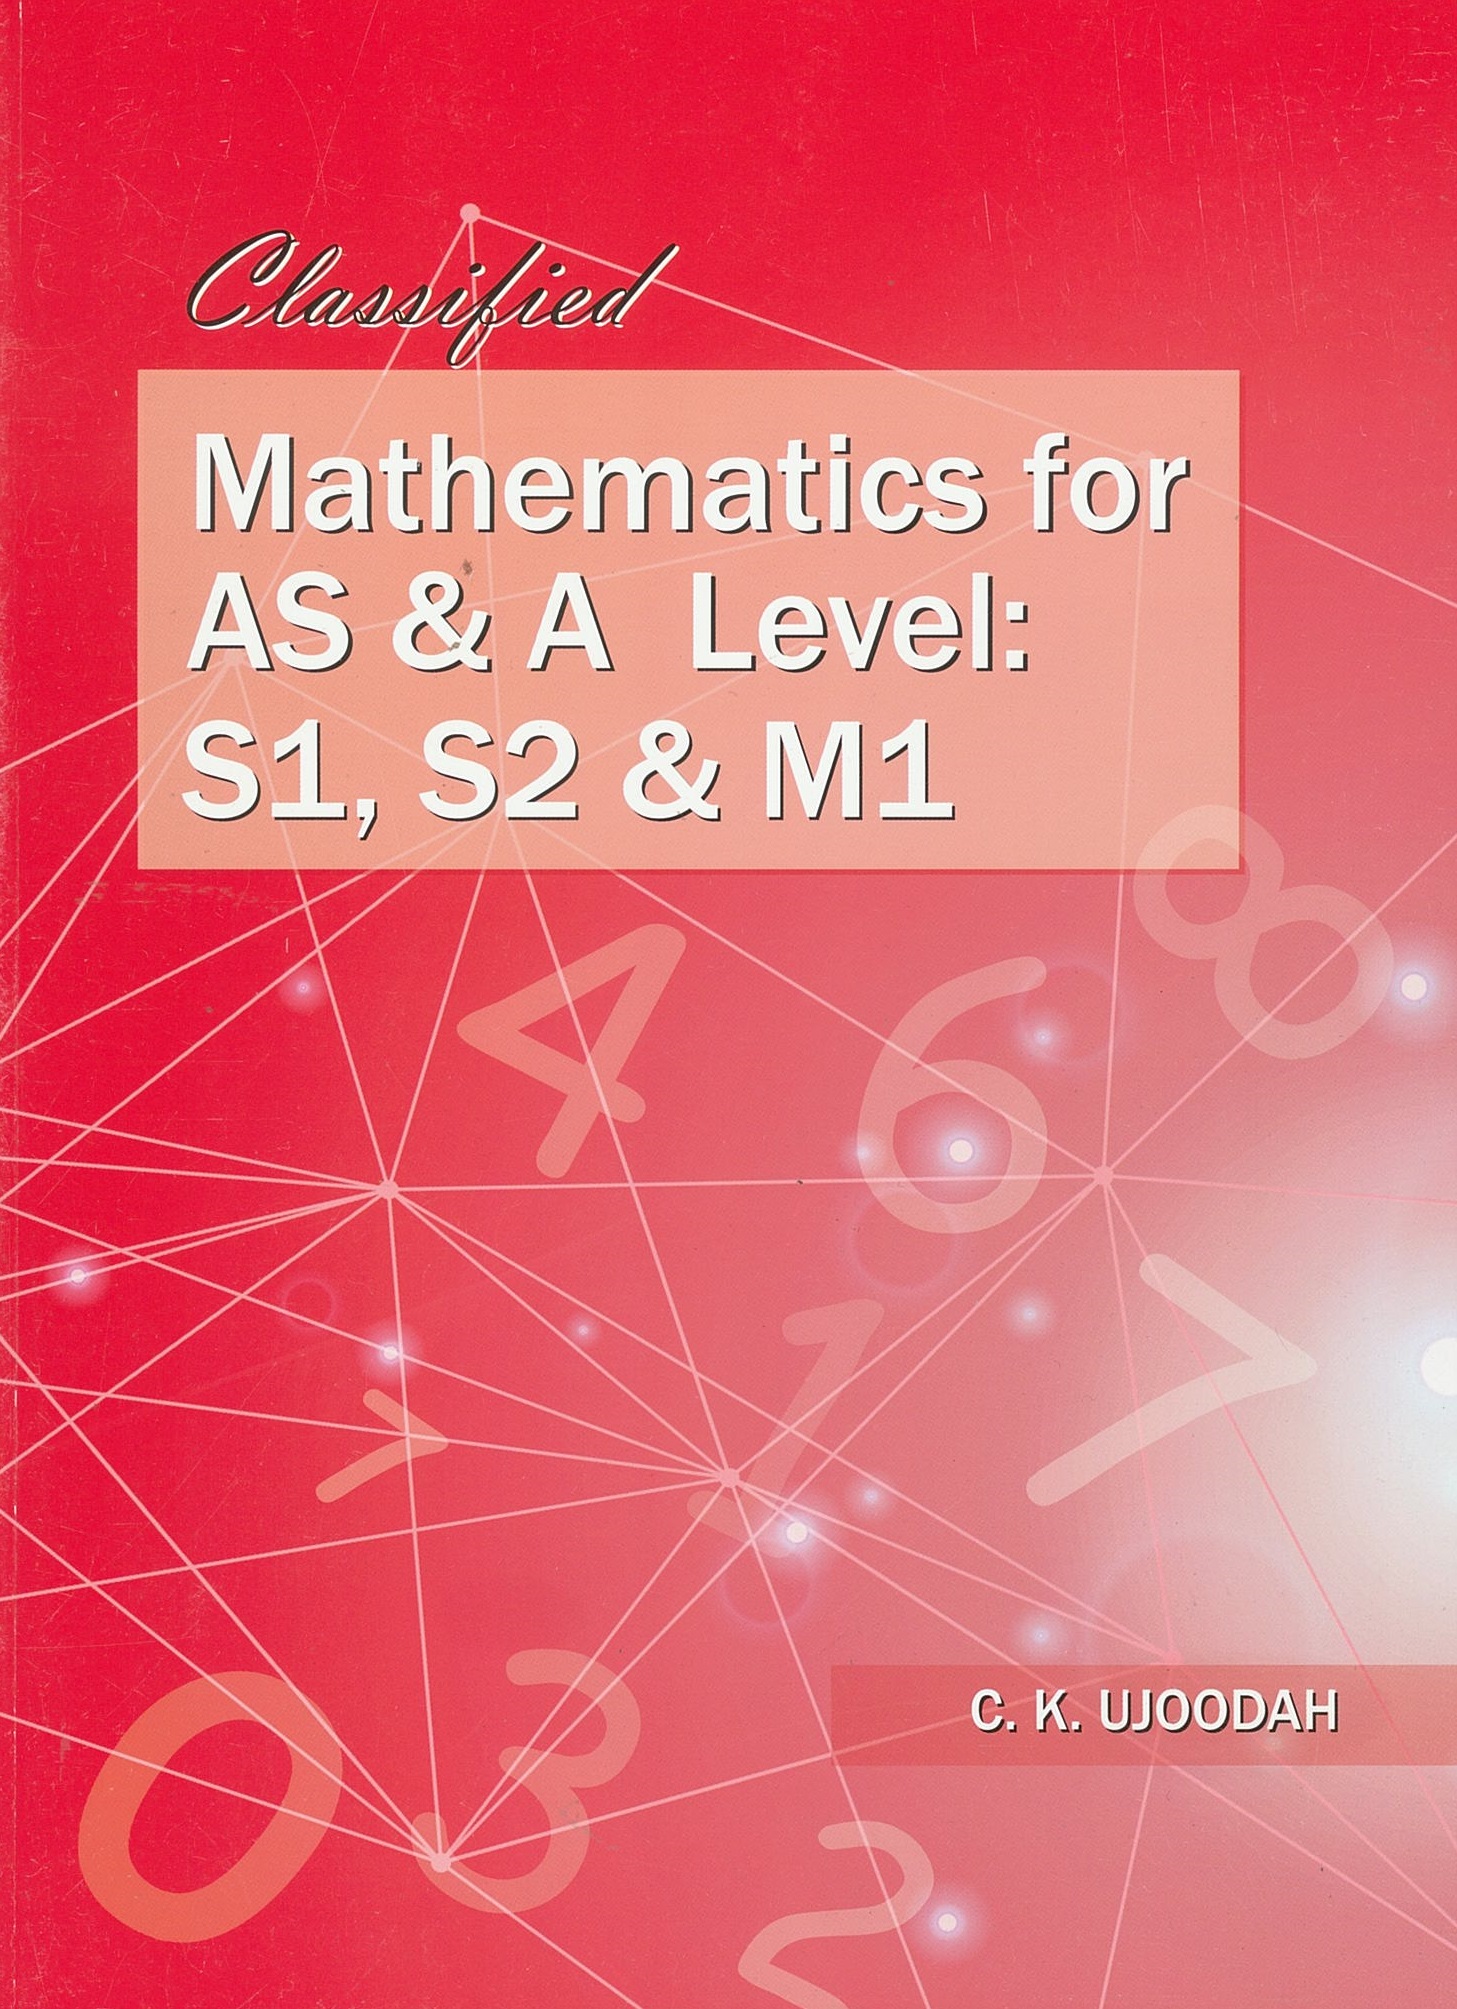 CLASSIFIED MATHEMATICS FOR AS & A LEVEL: S1 S2 & M1